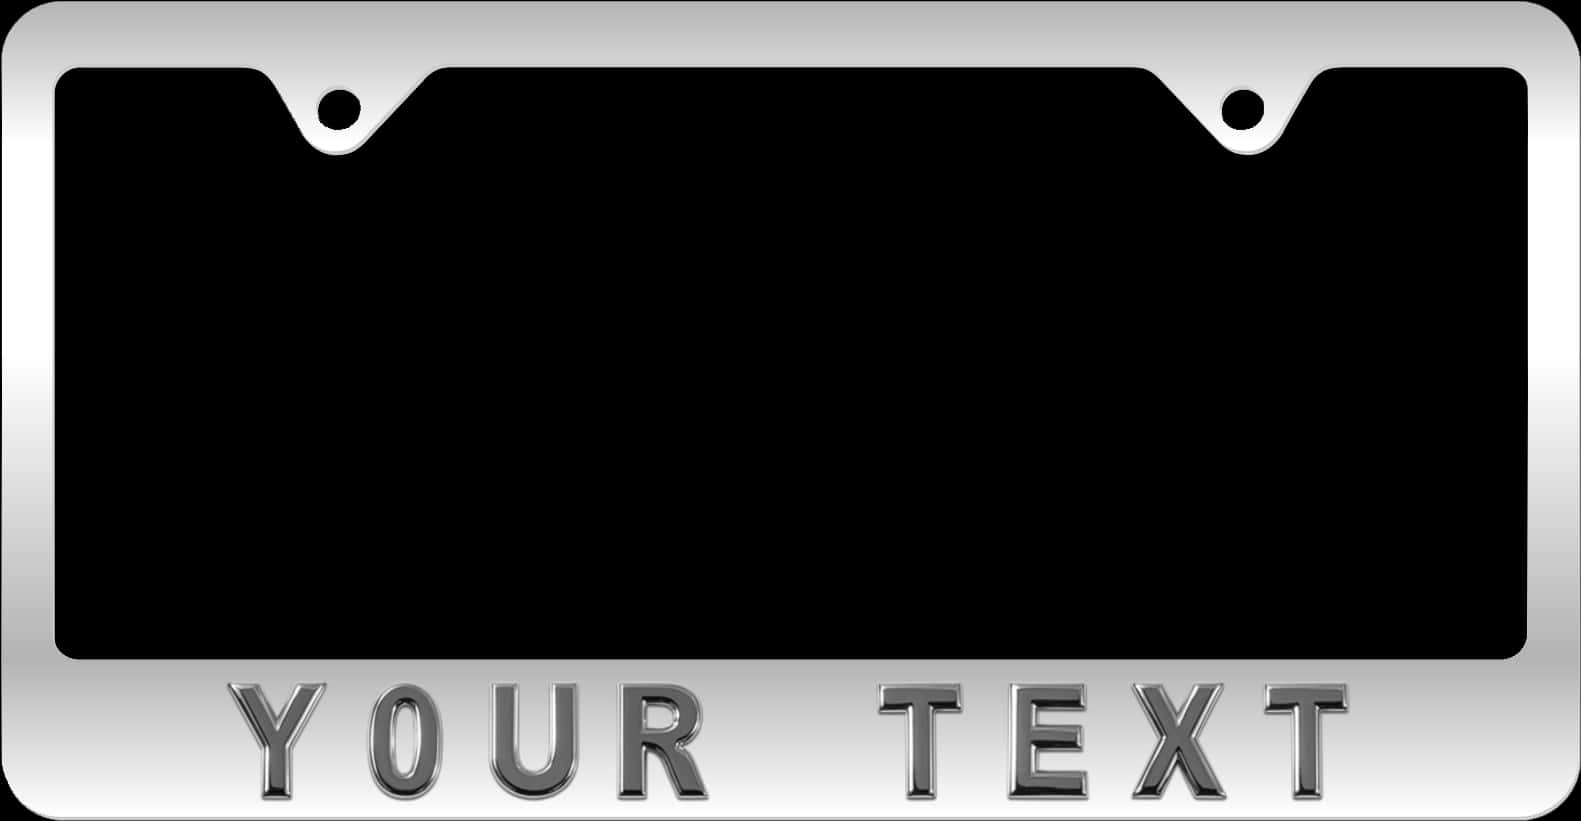 Blank License Plate Template PNG image